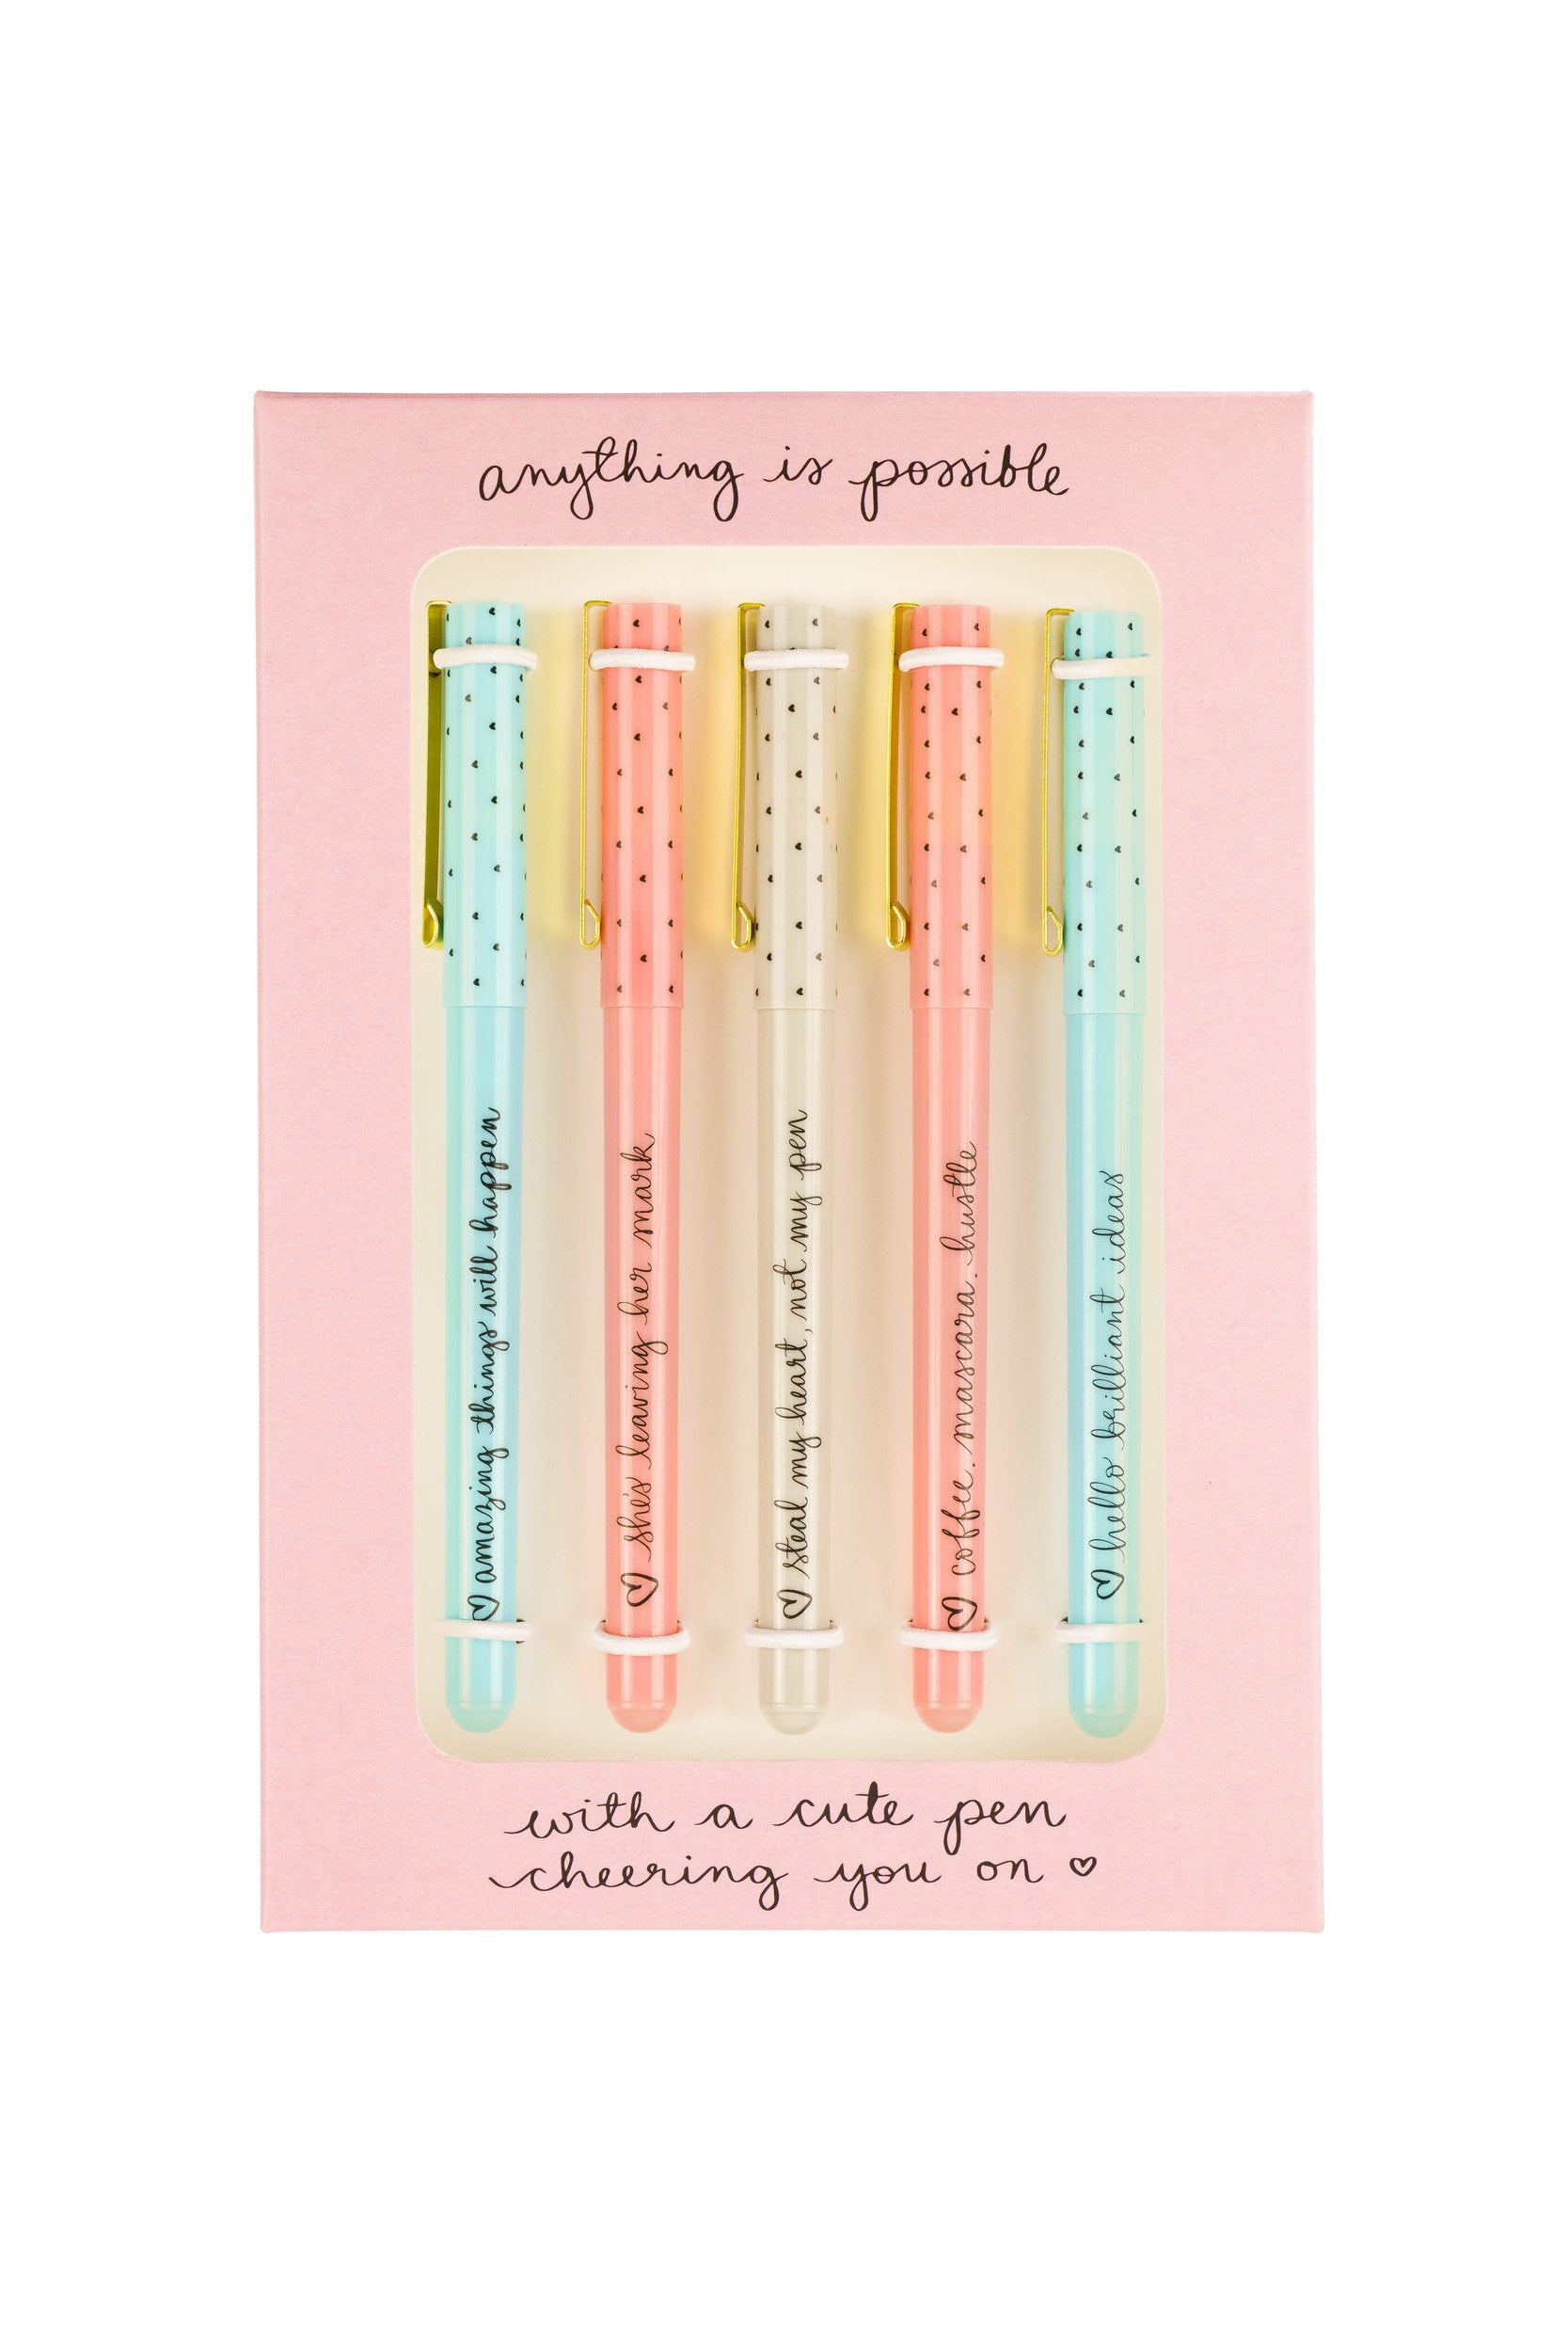 Eccolo Dayna Lee Collection Anything is Possible Pens